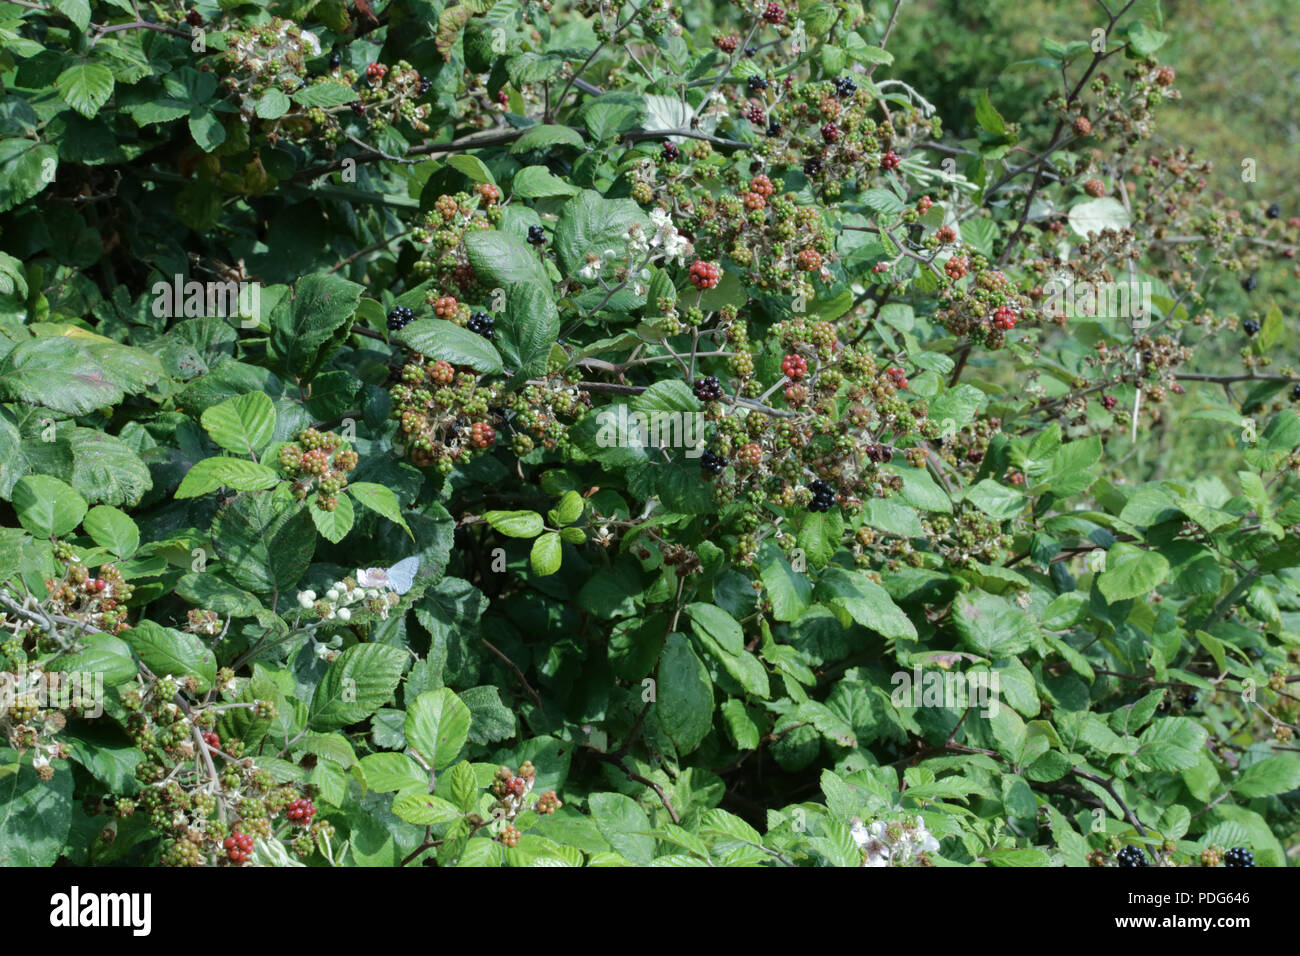 Busy green Hedgerow of blackberry plants Stock Photo - Alamy